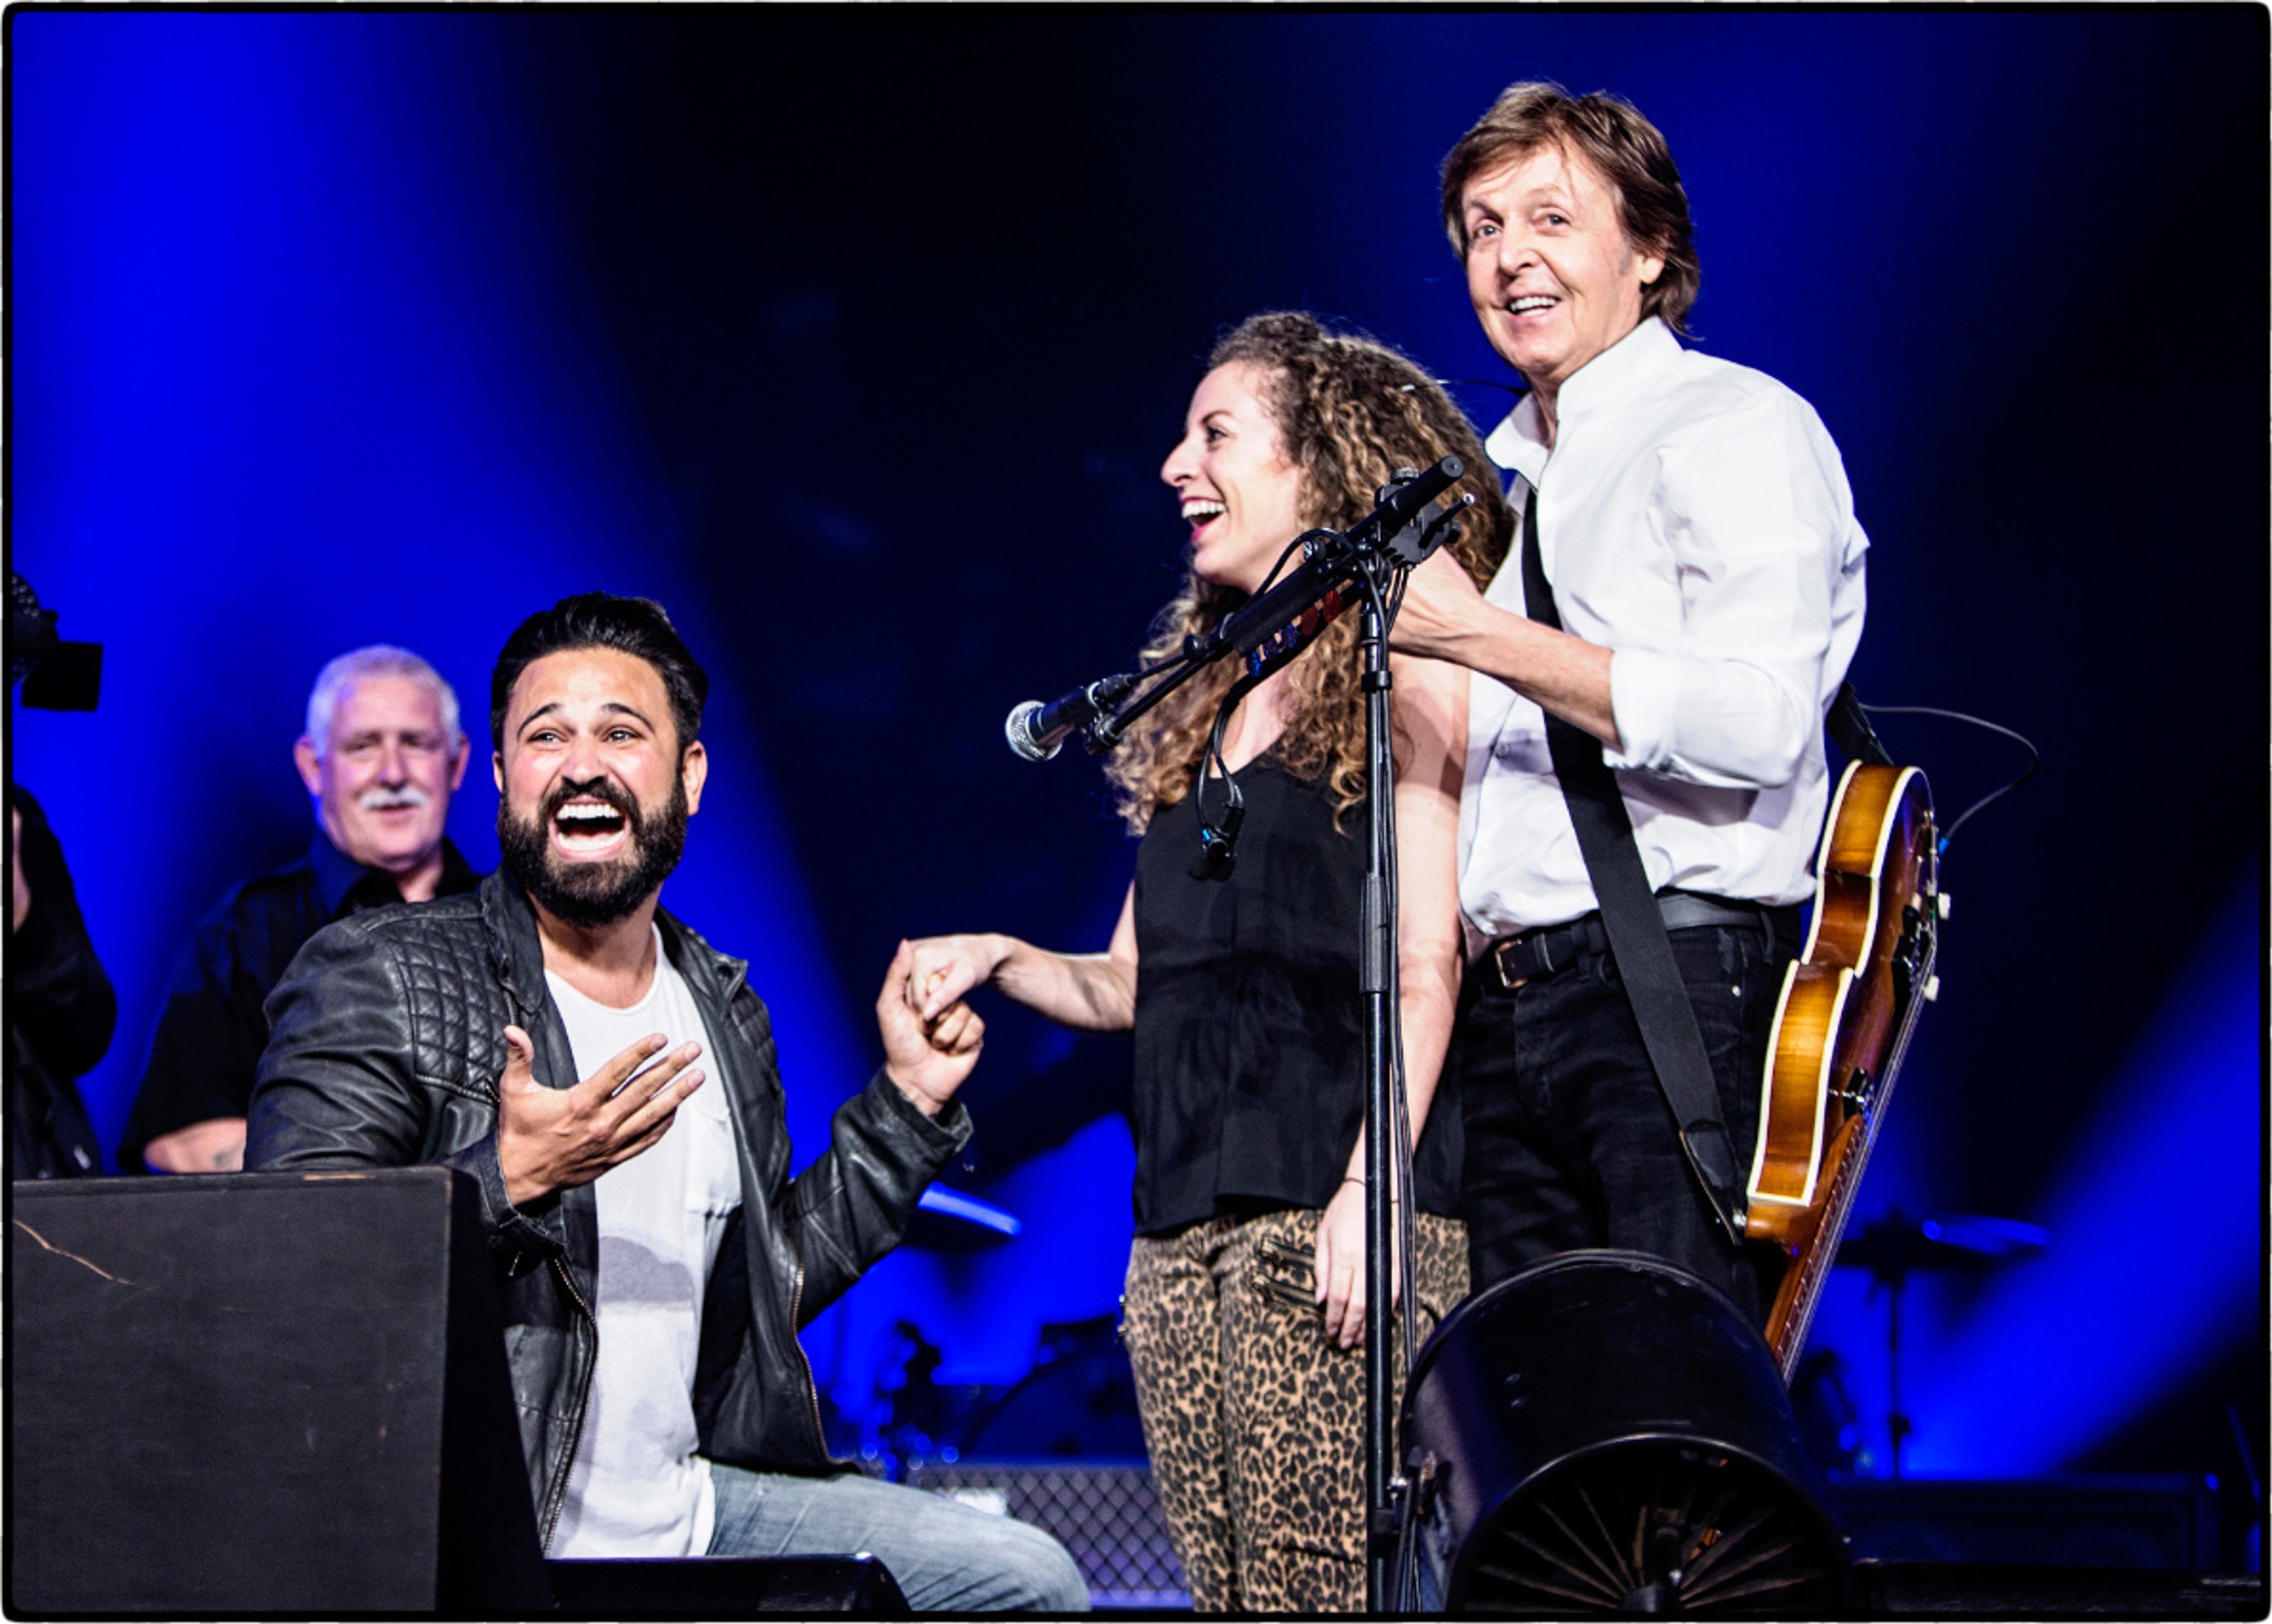 Paul's 'One On One' tour at the Moda Center, Portland